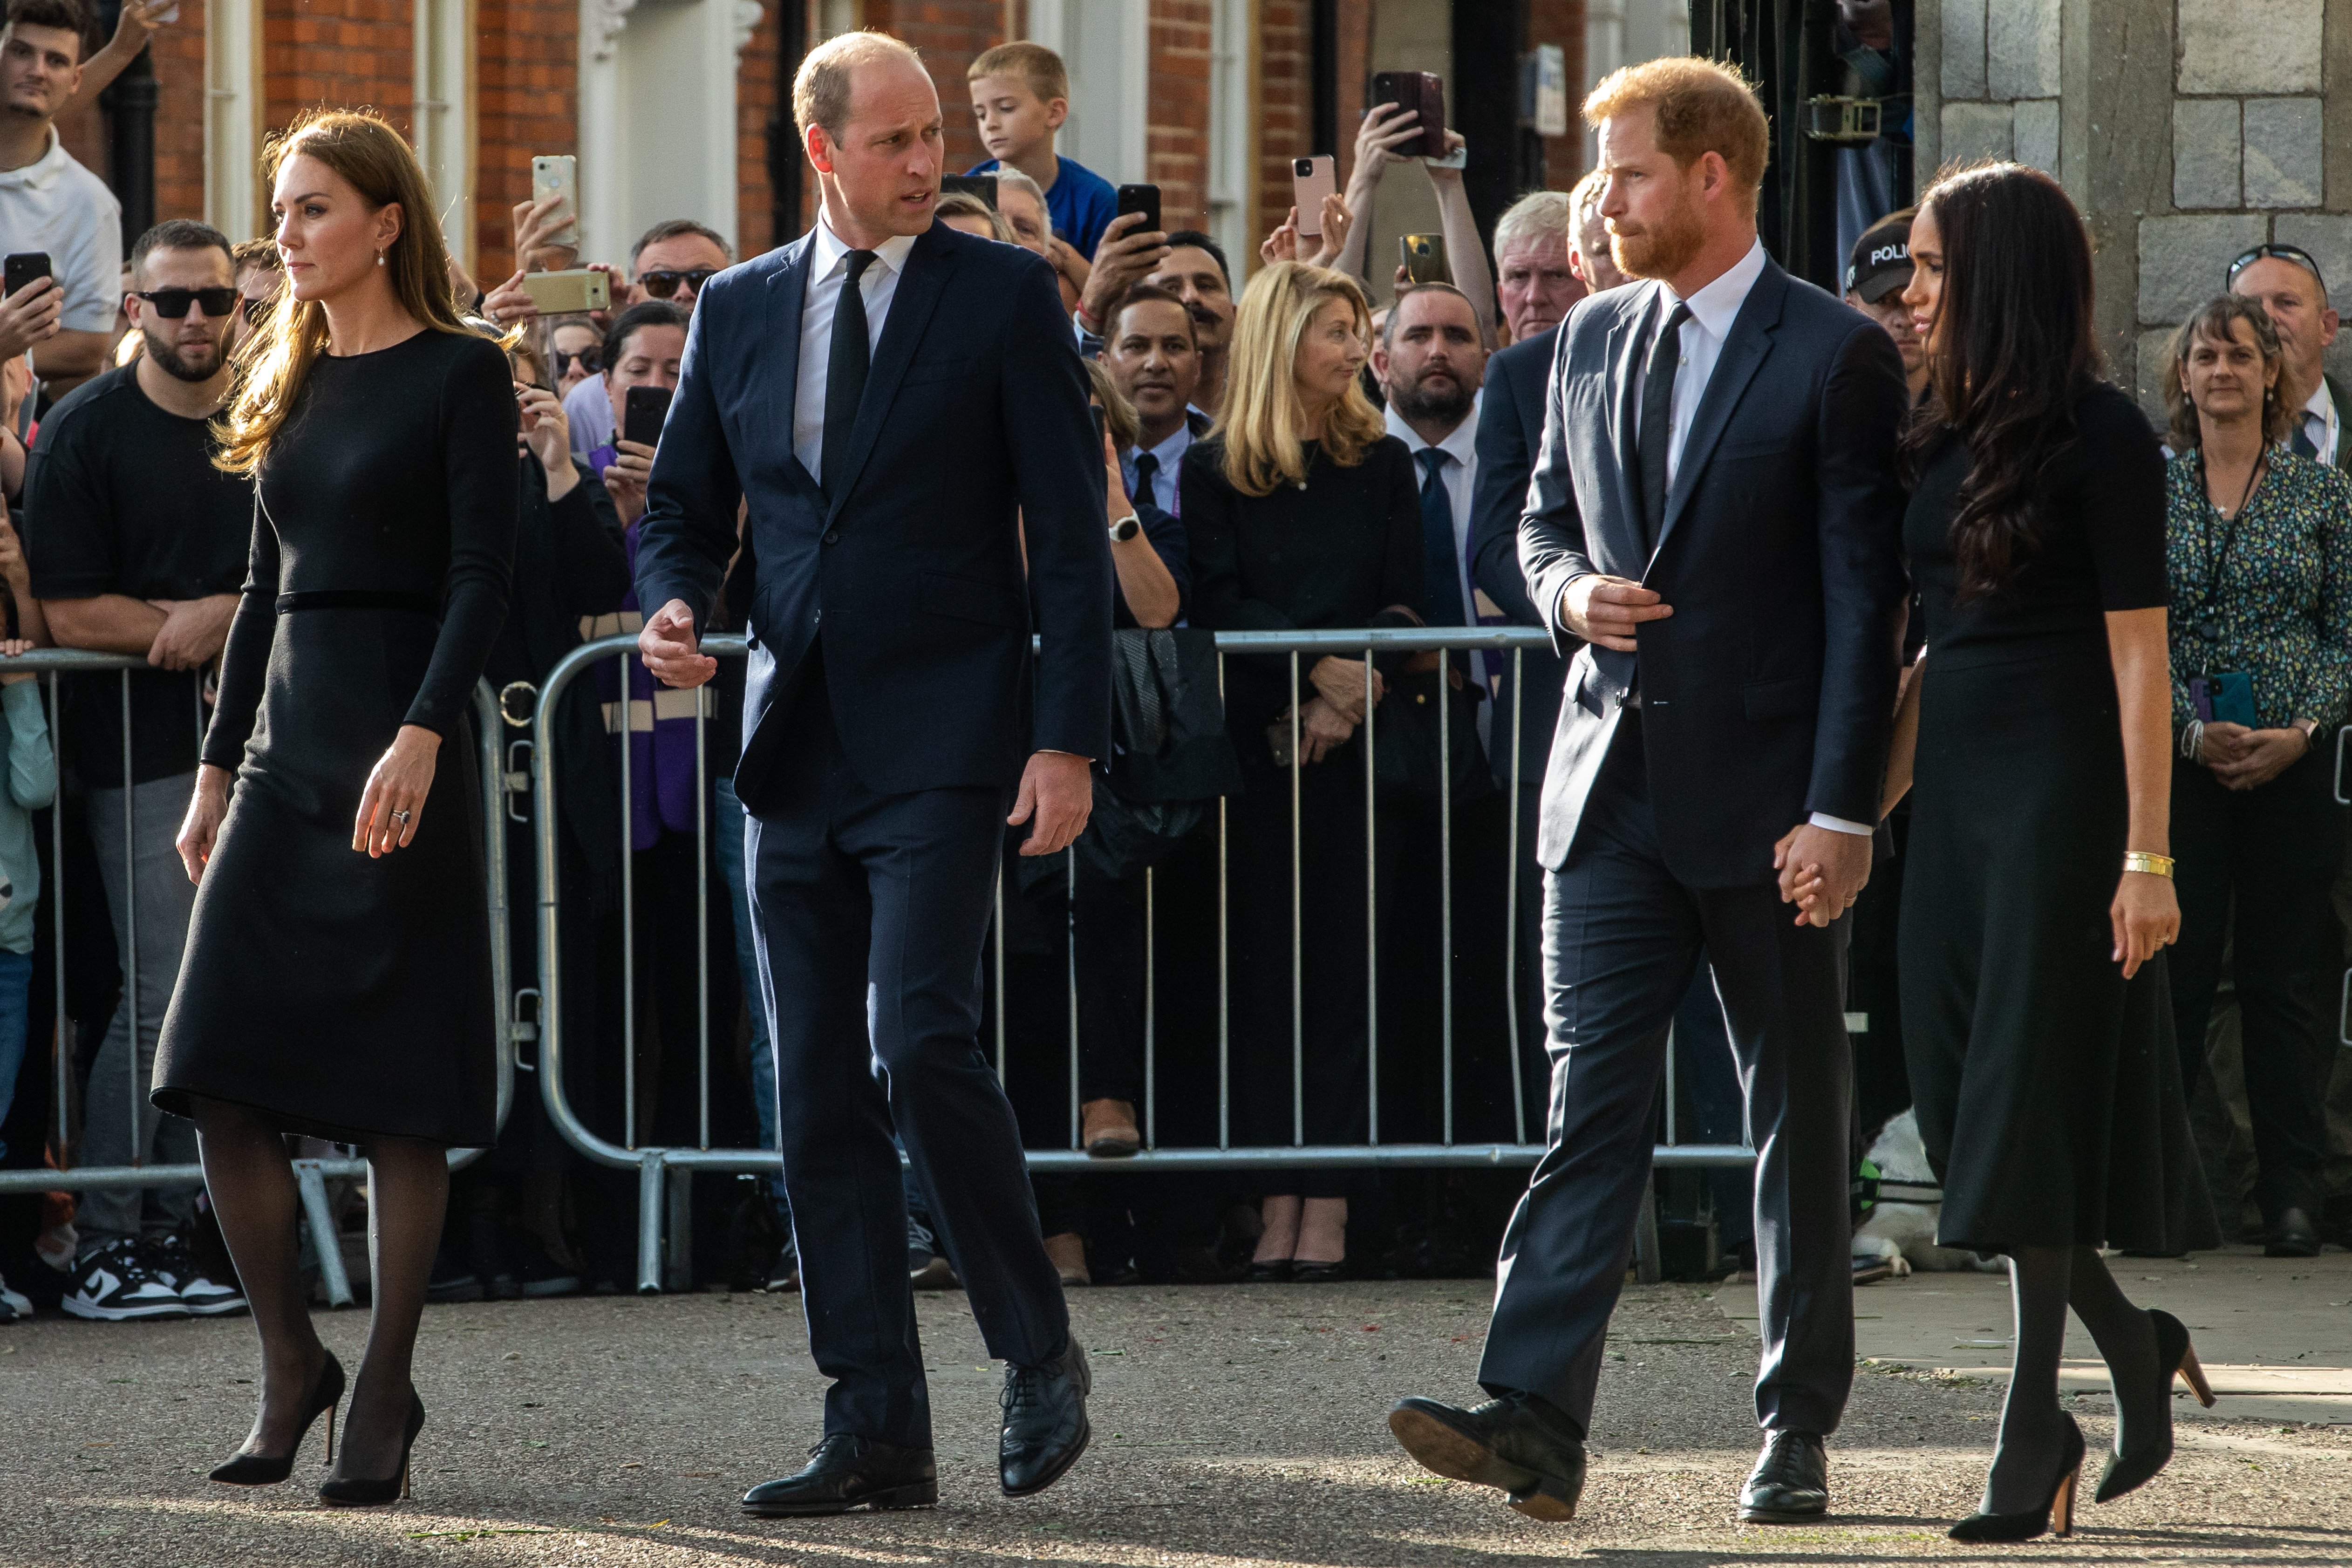 Prince William and Catherine, the new Prince and Princess of Wales, accompanied by Prince Harry and Meghan, the Duke and Duchess of Sussex, proceed to greet well-wishers outside Windsor Castle on 10th September 2022 in Windsor, United Kingdom | Source: Getty Images 